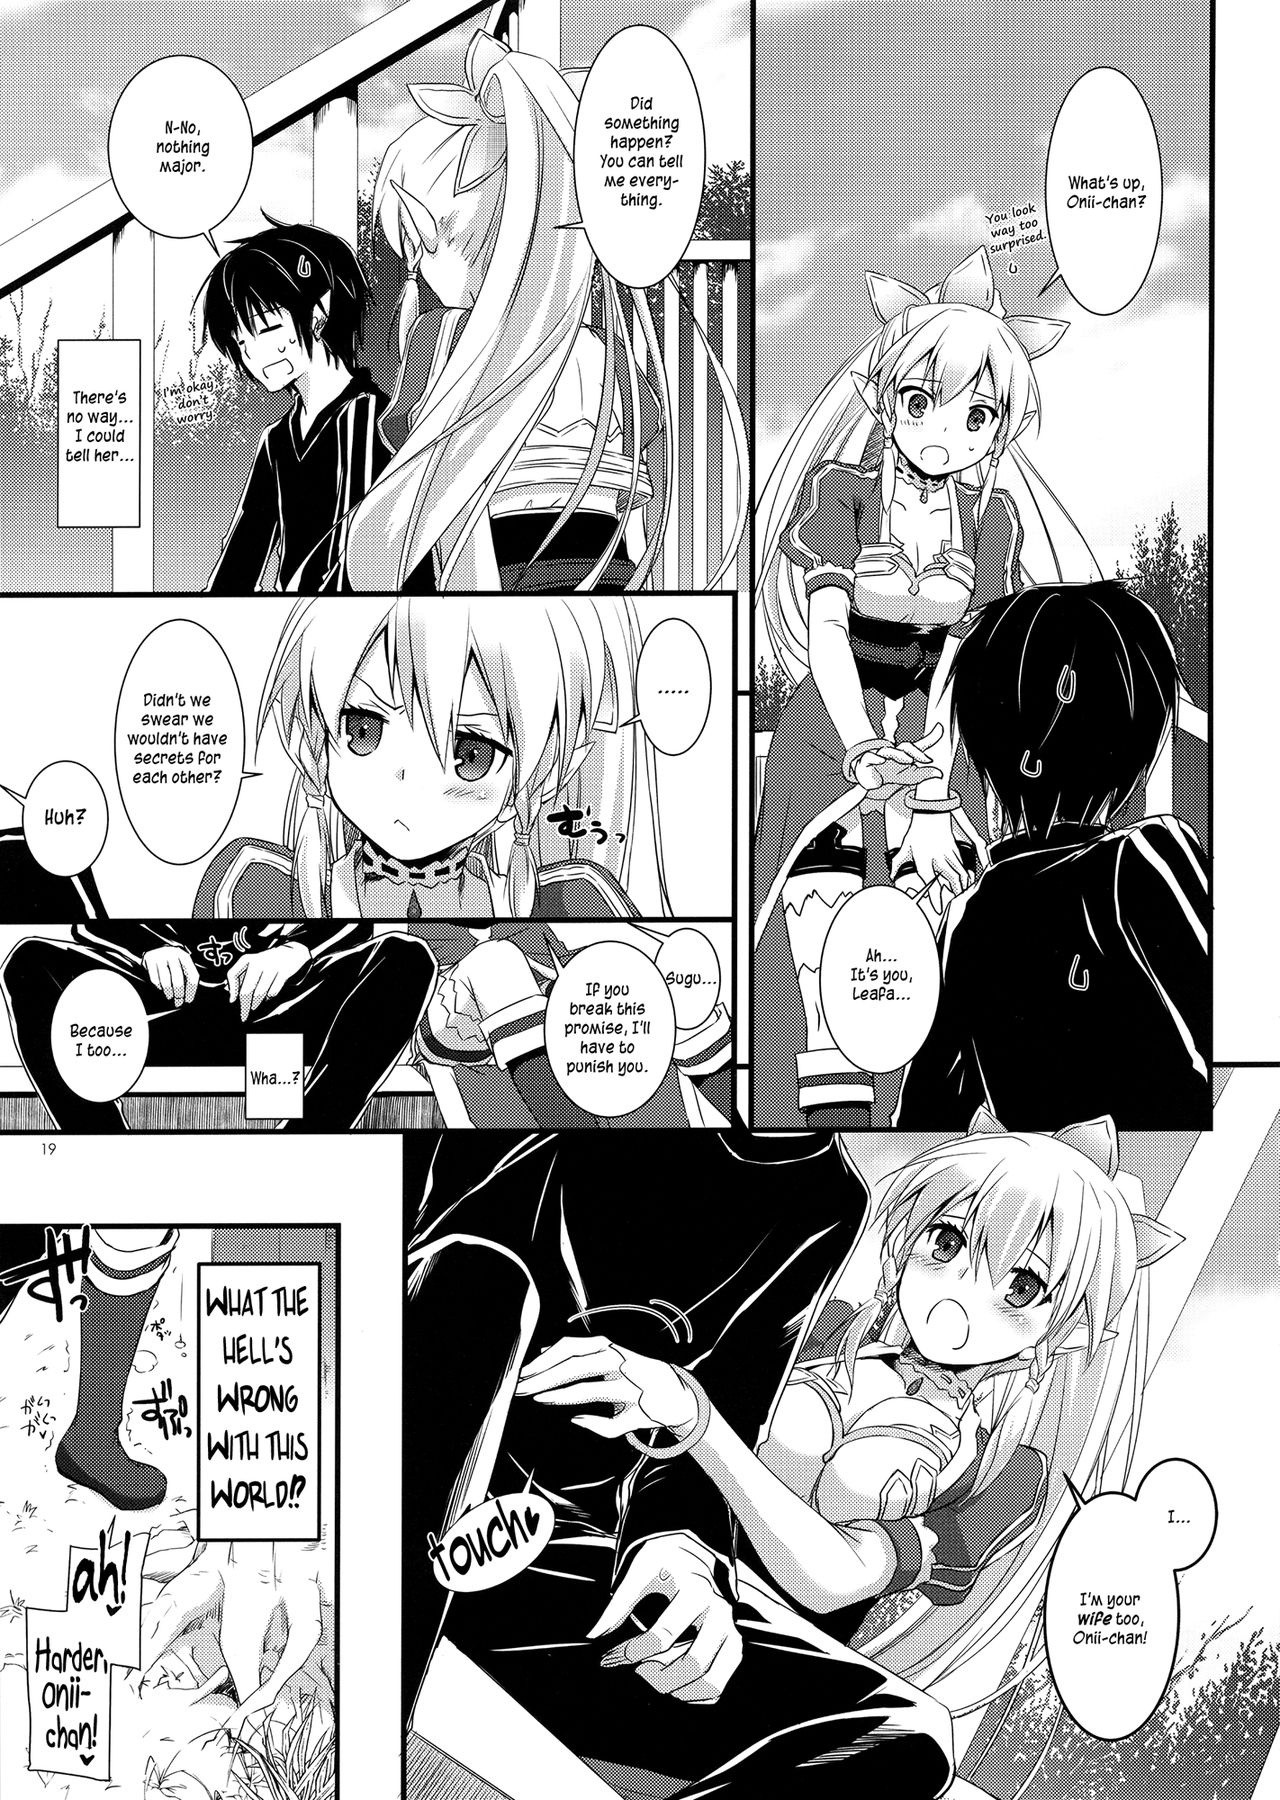 D.L. Action 72 hentai manga picture 18